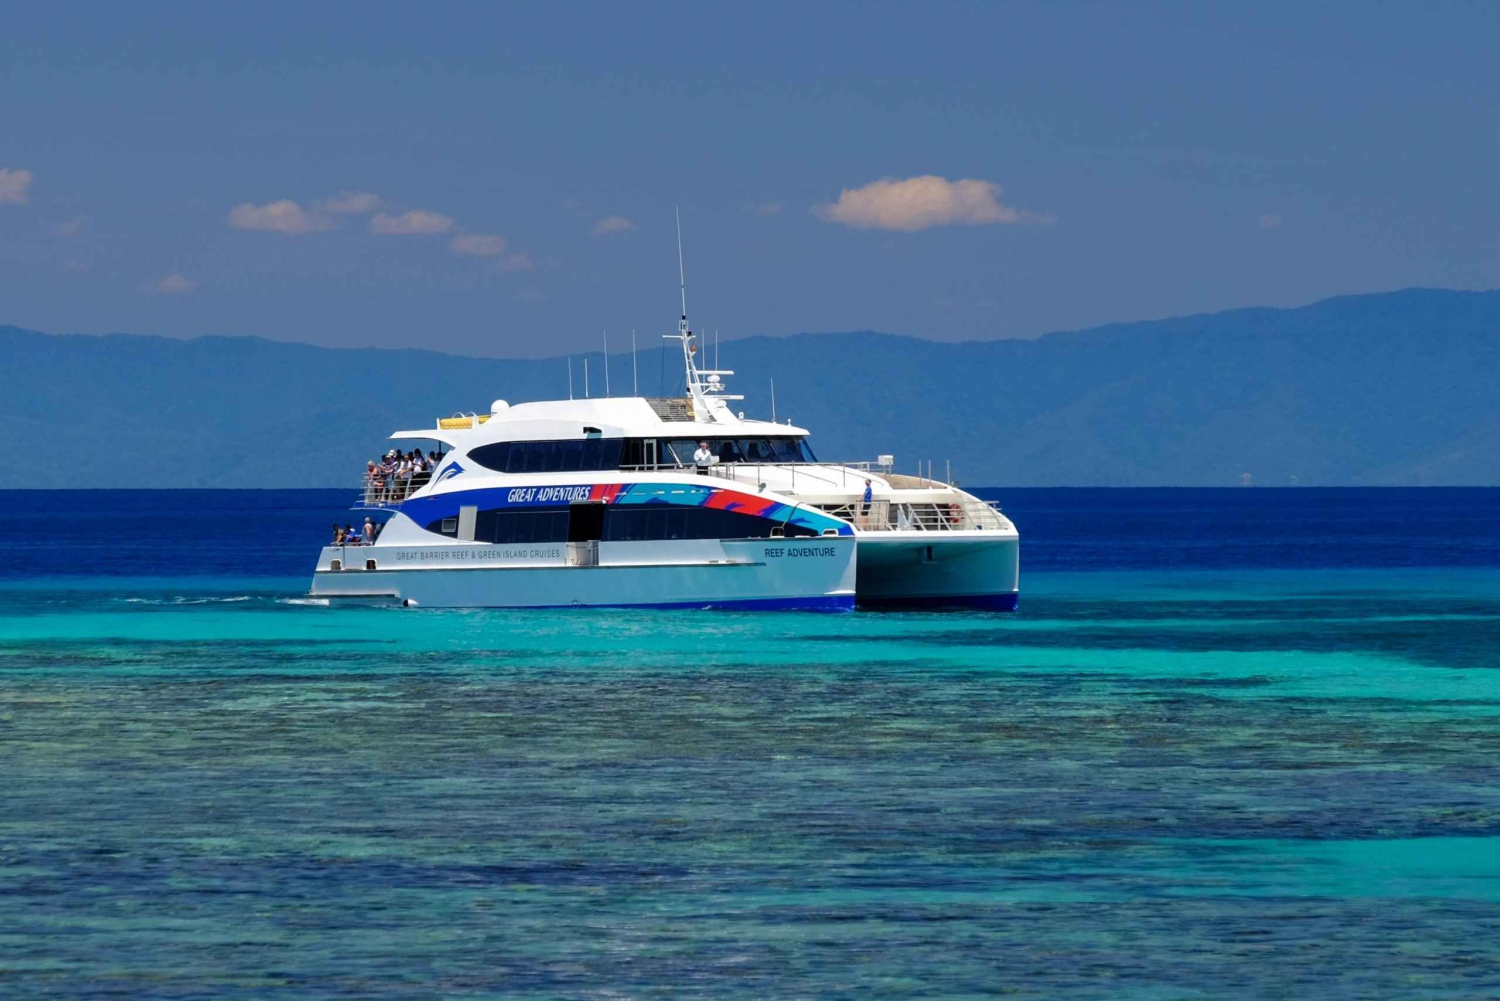 From Cairns: Green Island Snorkelling or Glass Bottom Boat